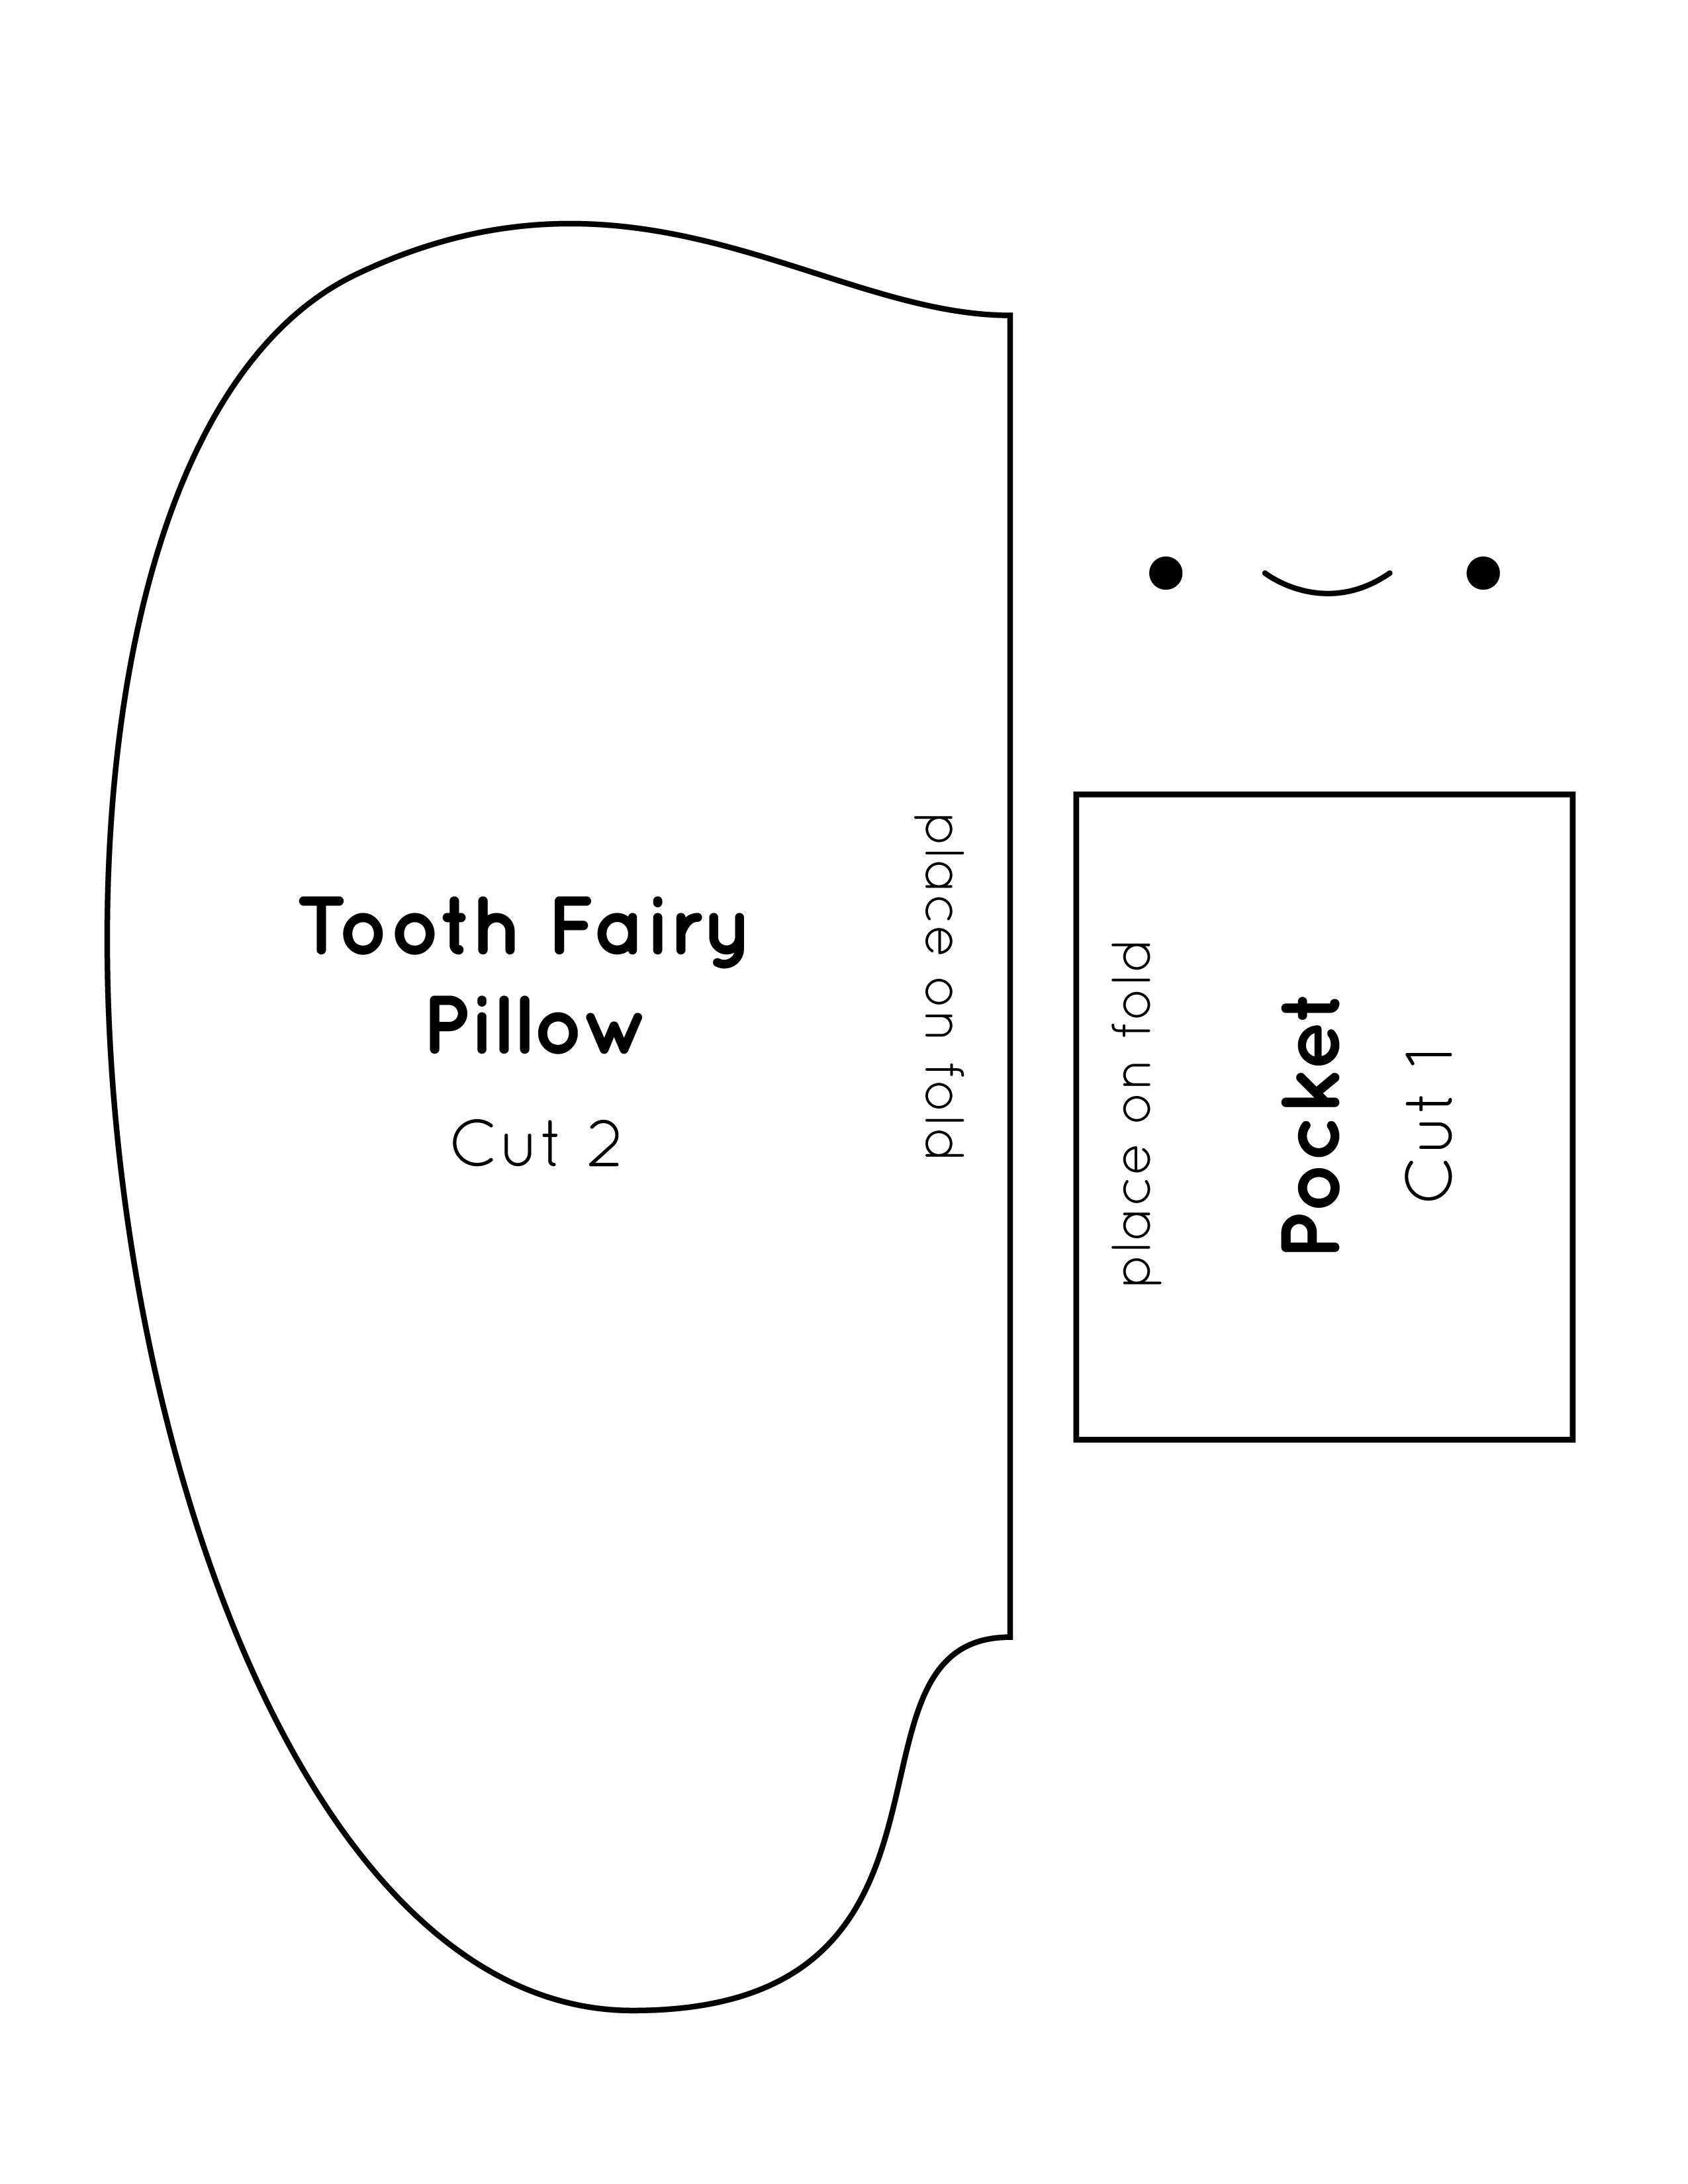 How to Make a Tooth Fairy Pillow